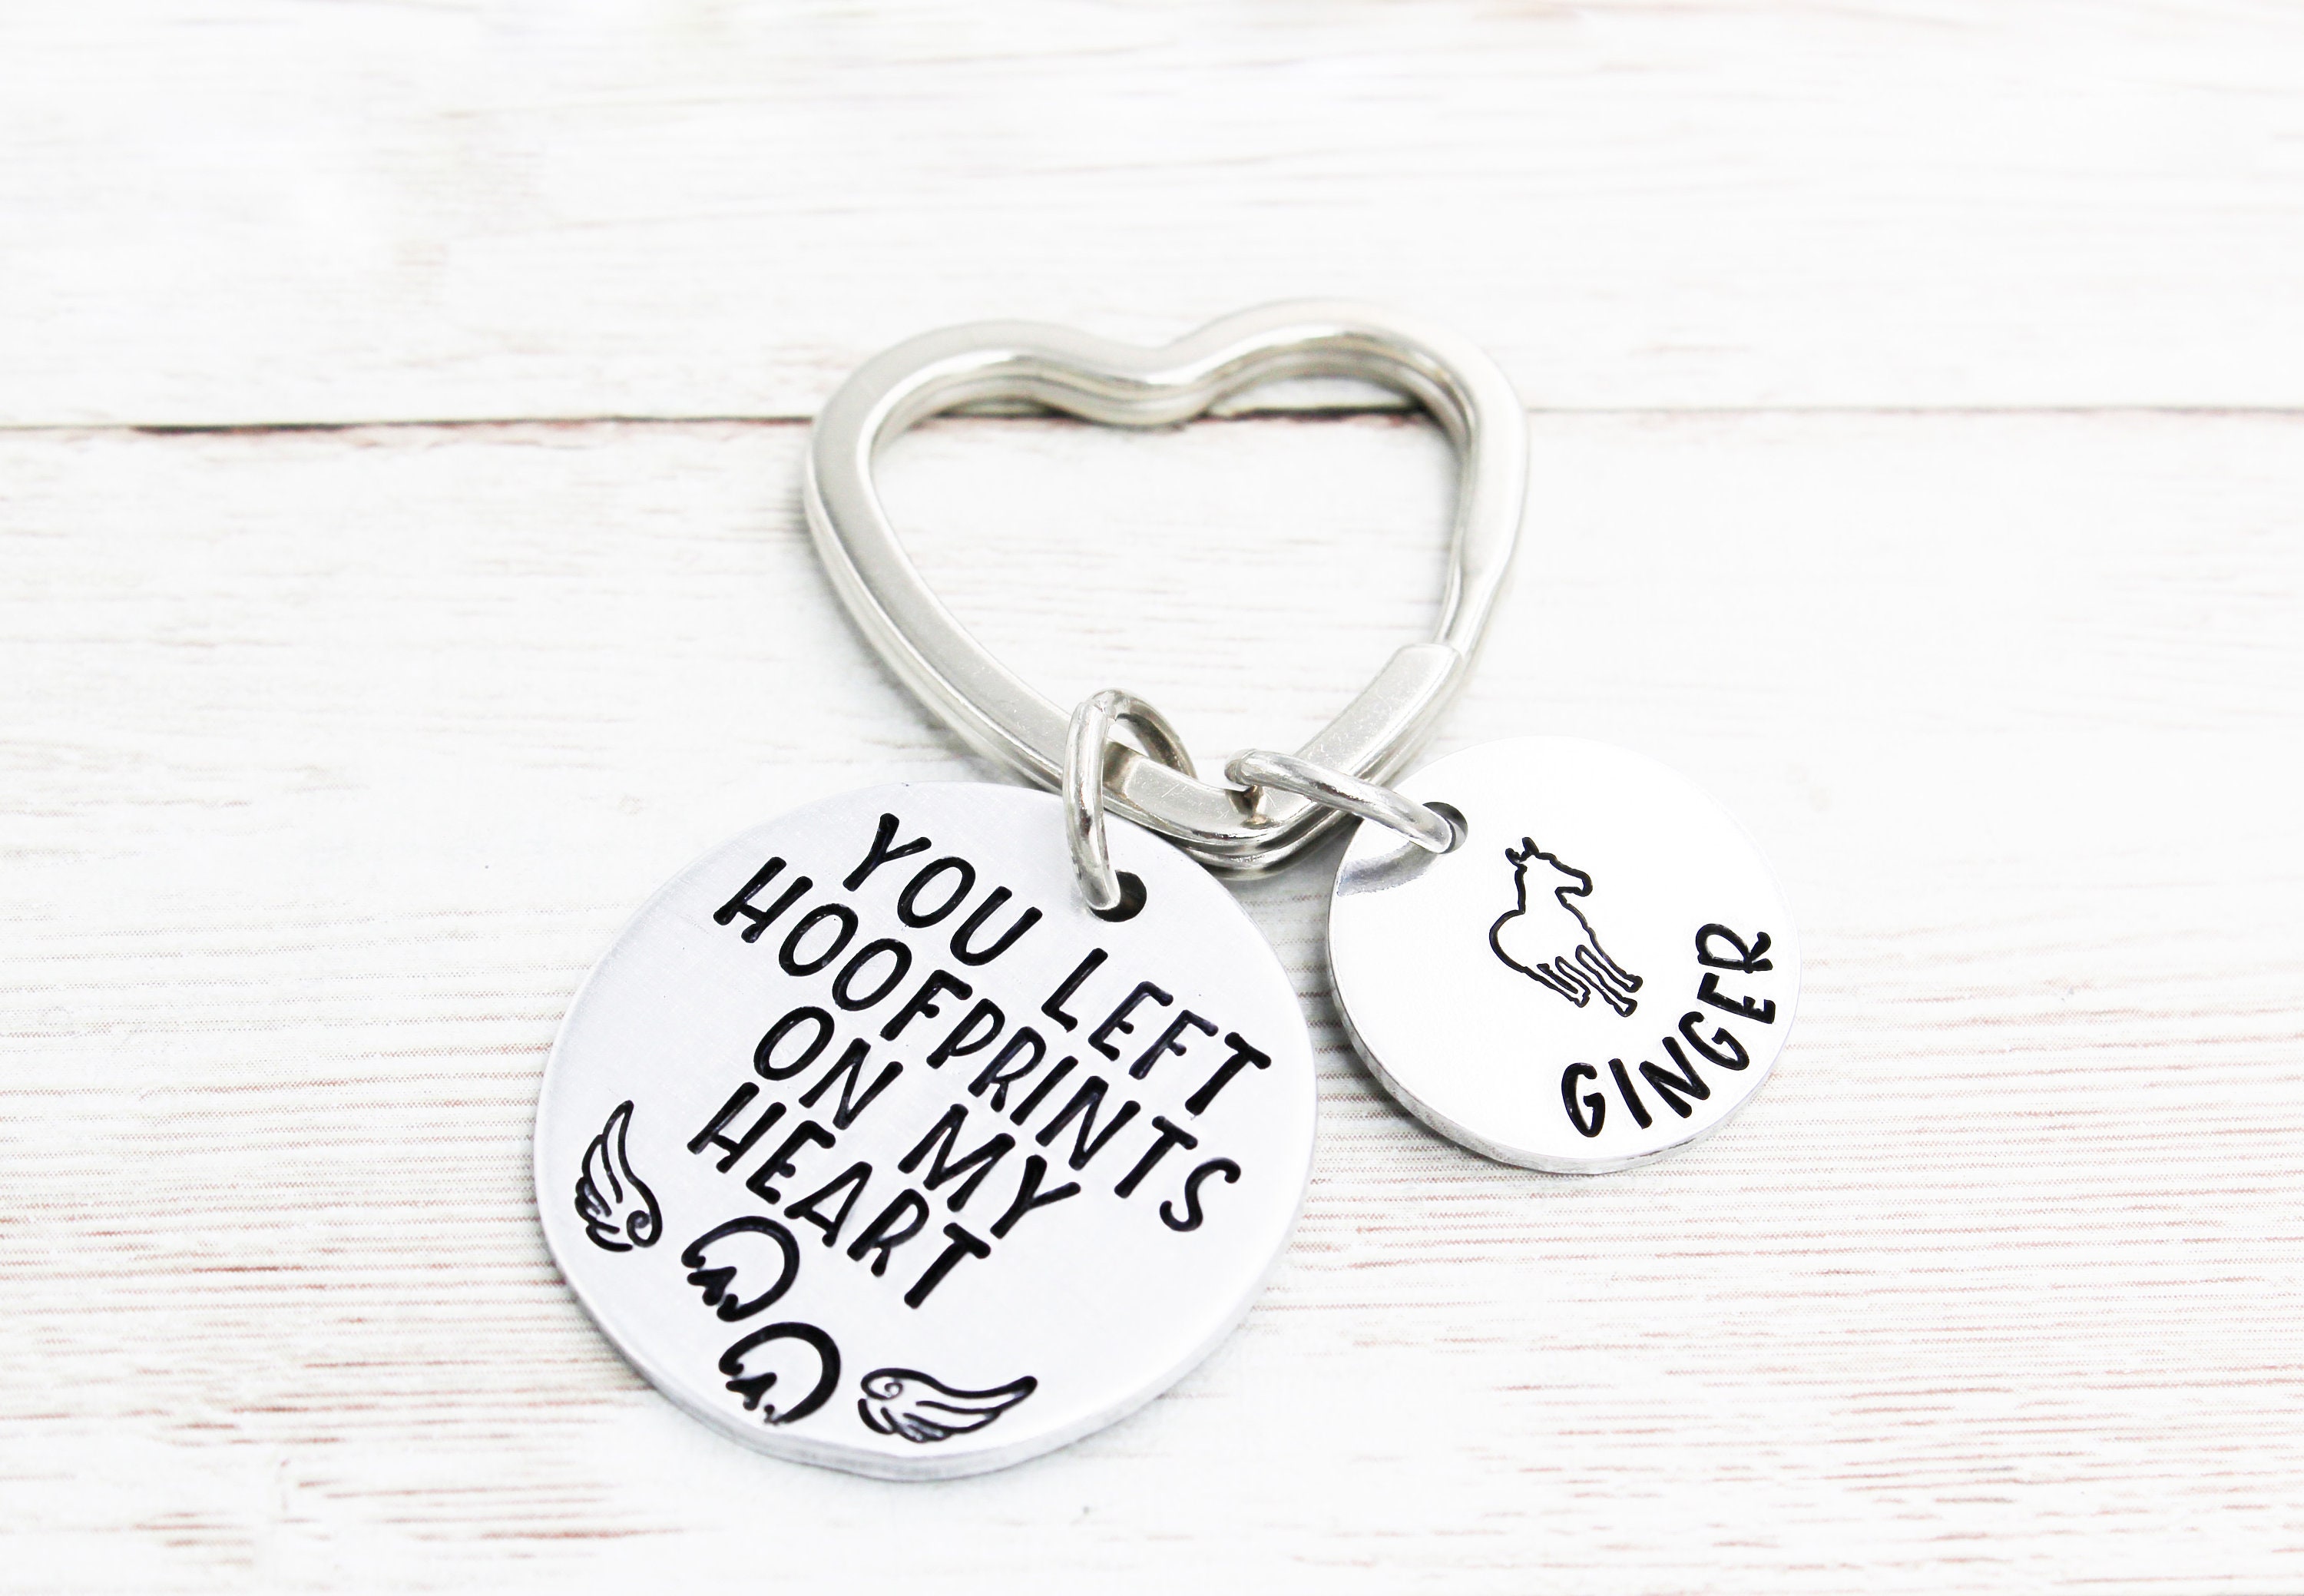 Horse Memorial, You Left Hoof Prints on My Heart, Keychain, Clip or  Necklace.